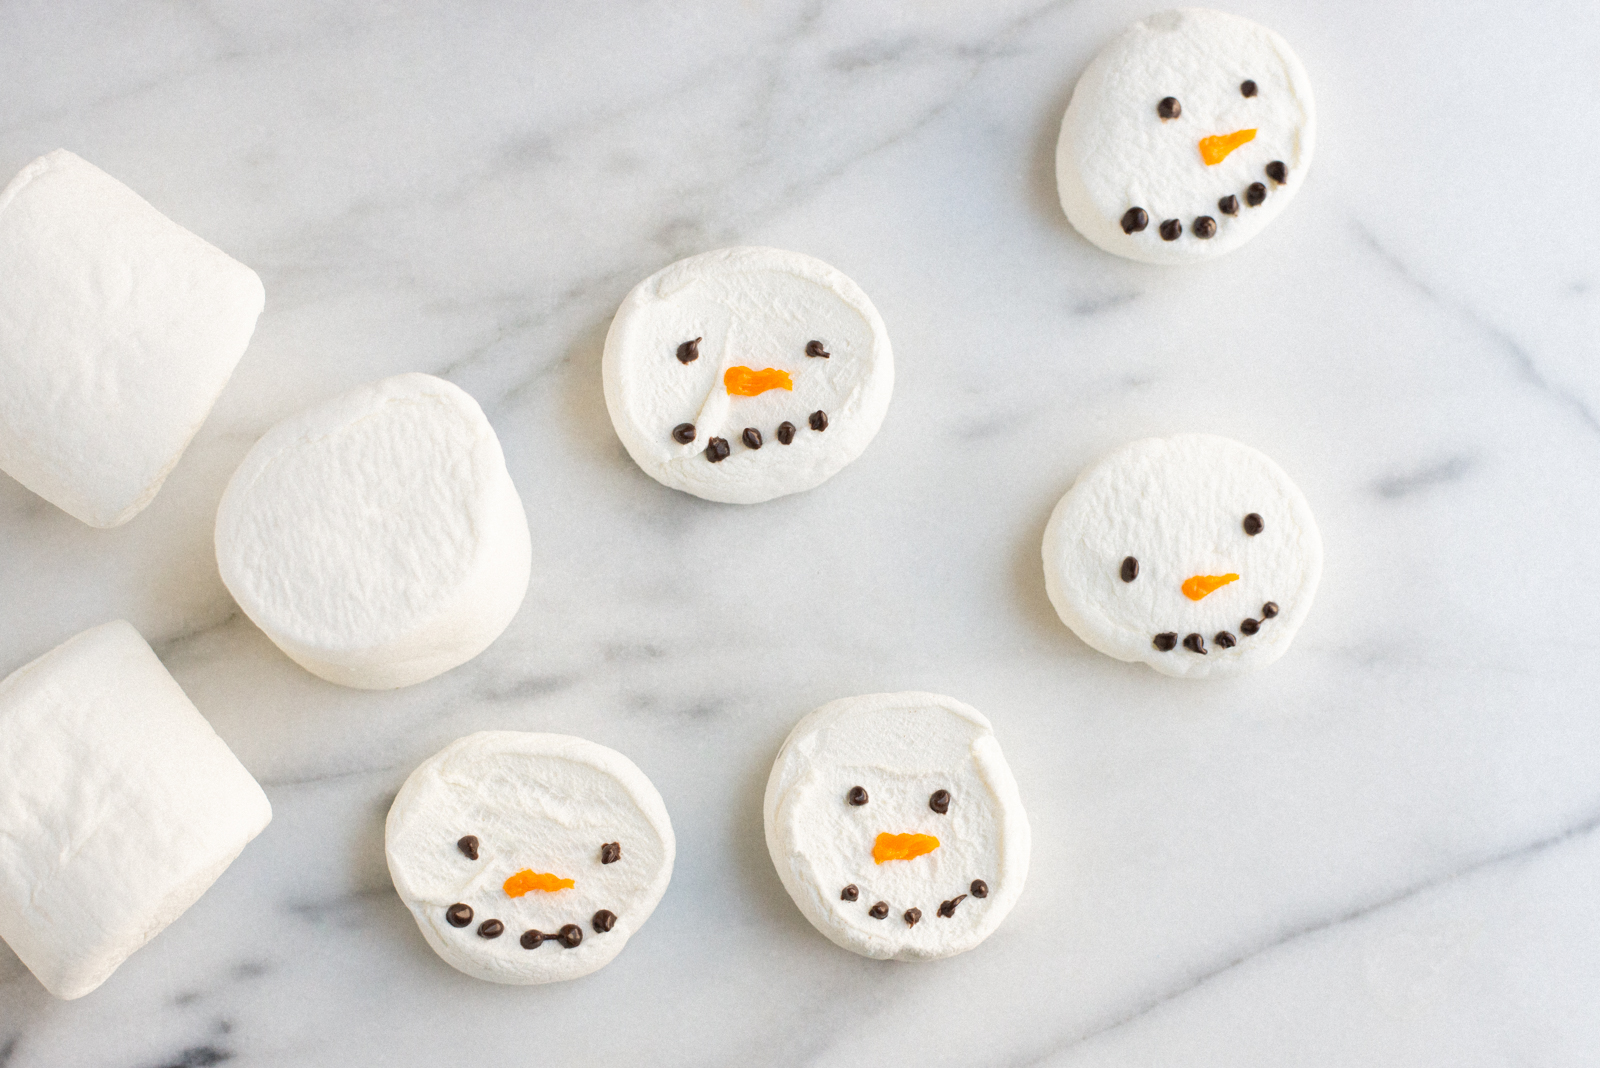 painting snowmen faces on marshmallows with candy melts